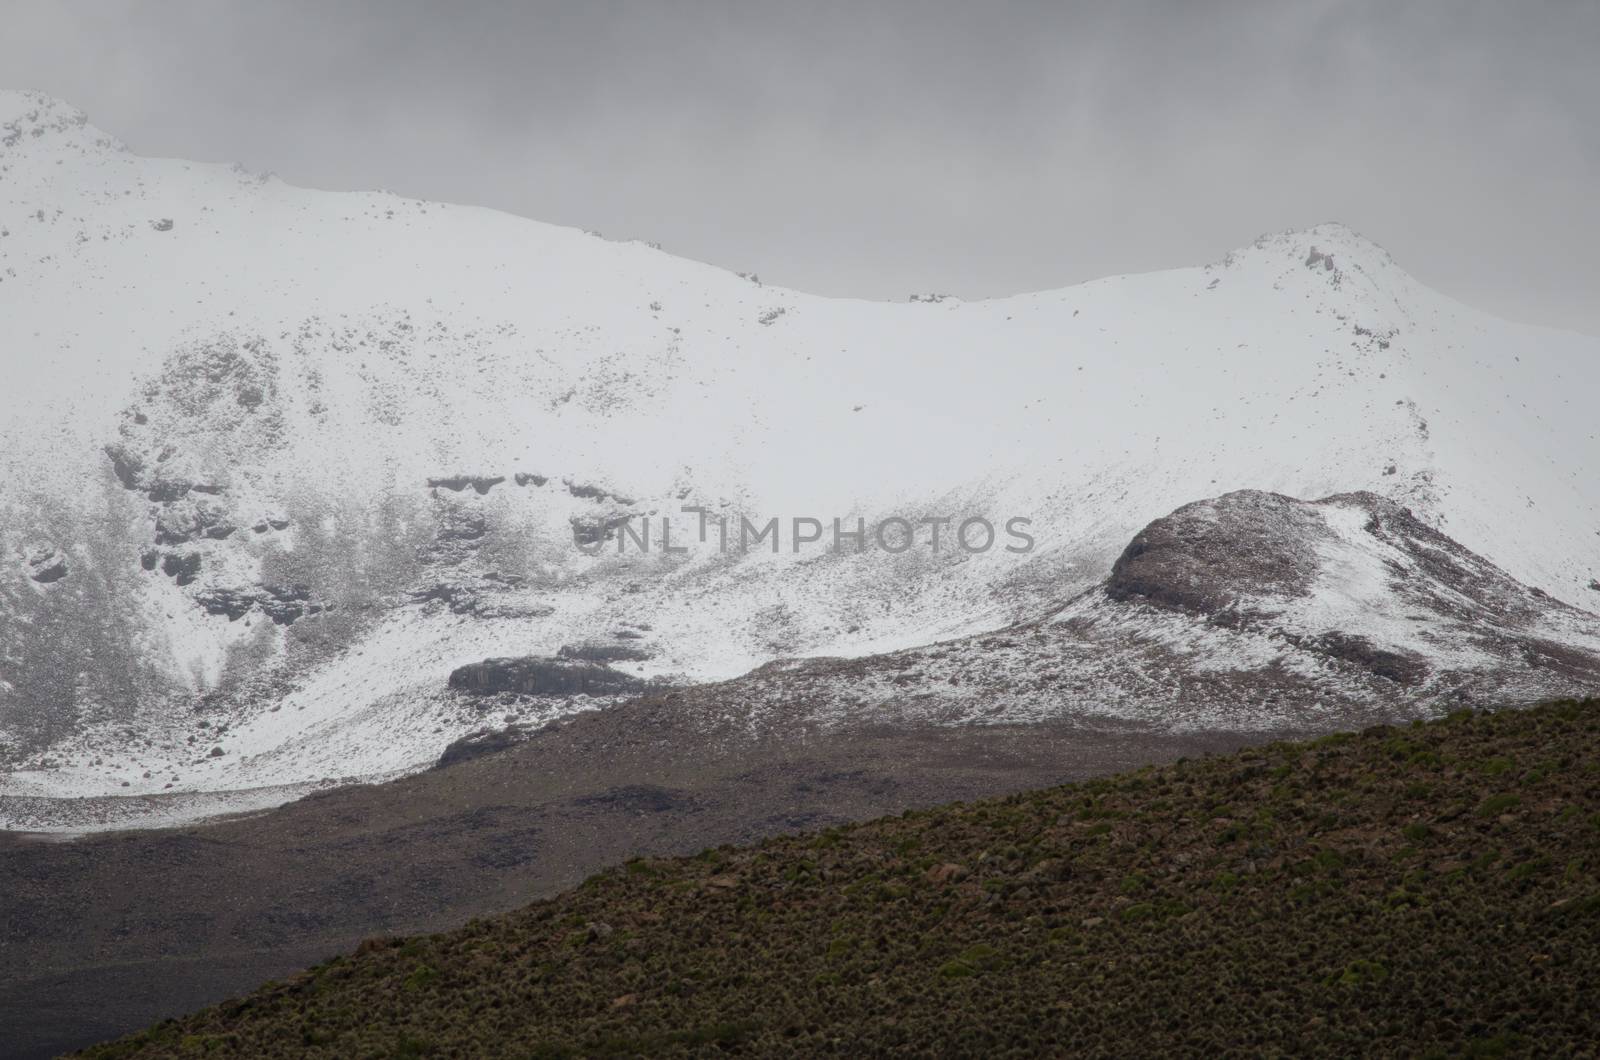 Landscape with snowy mountain in Lauca National Park. by VictorSuarez